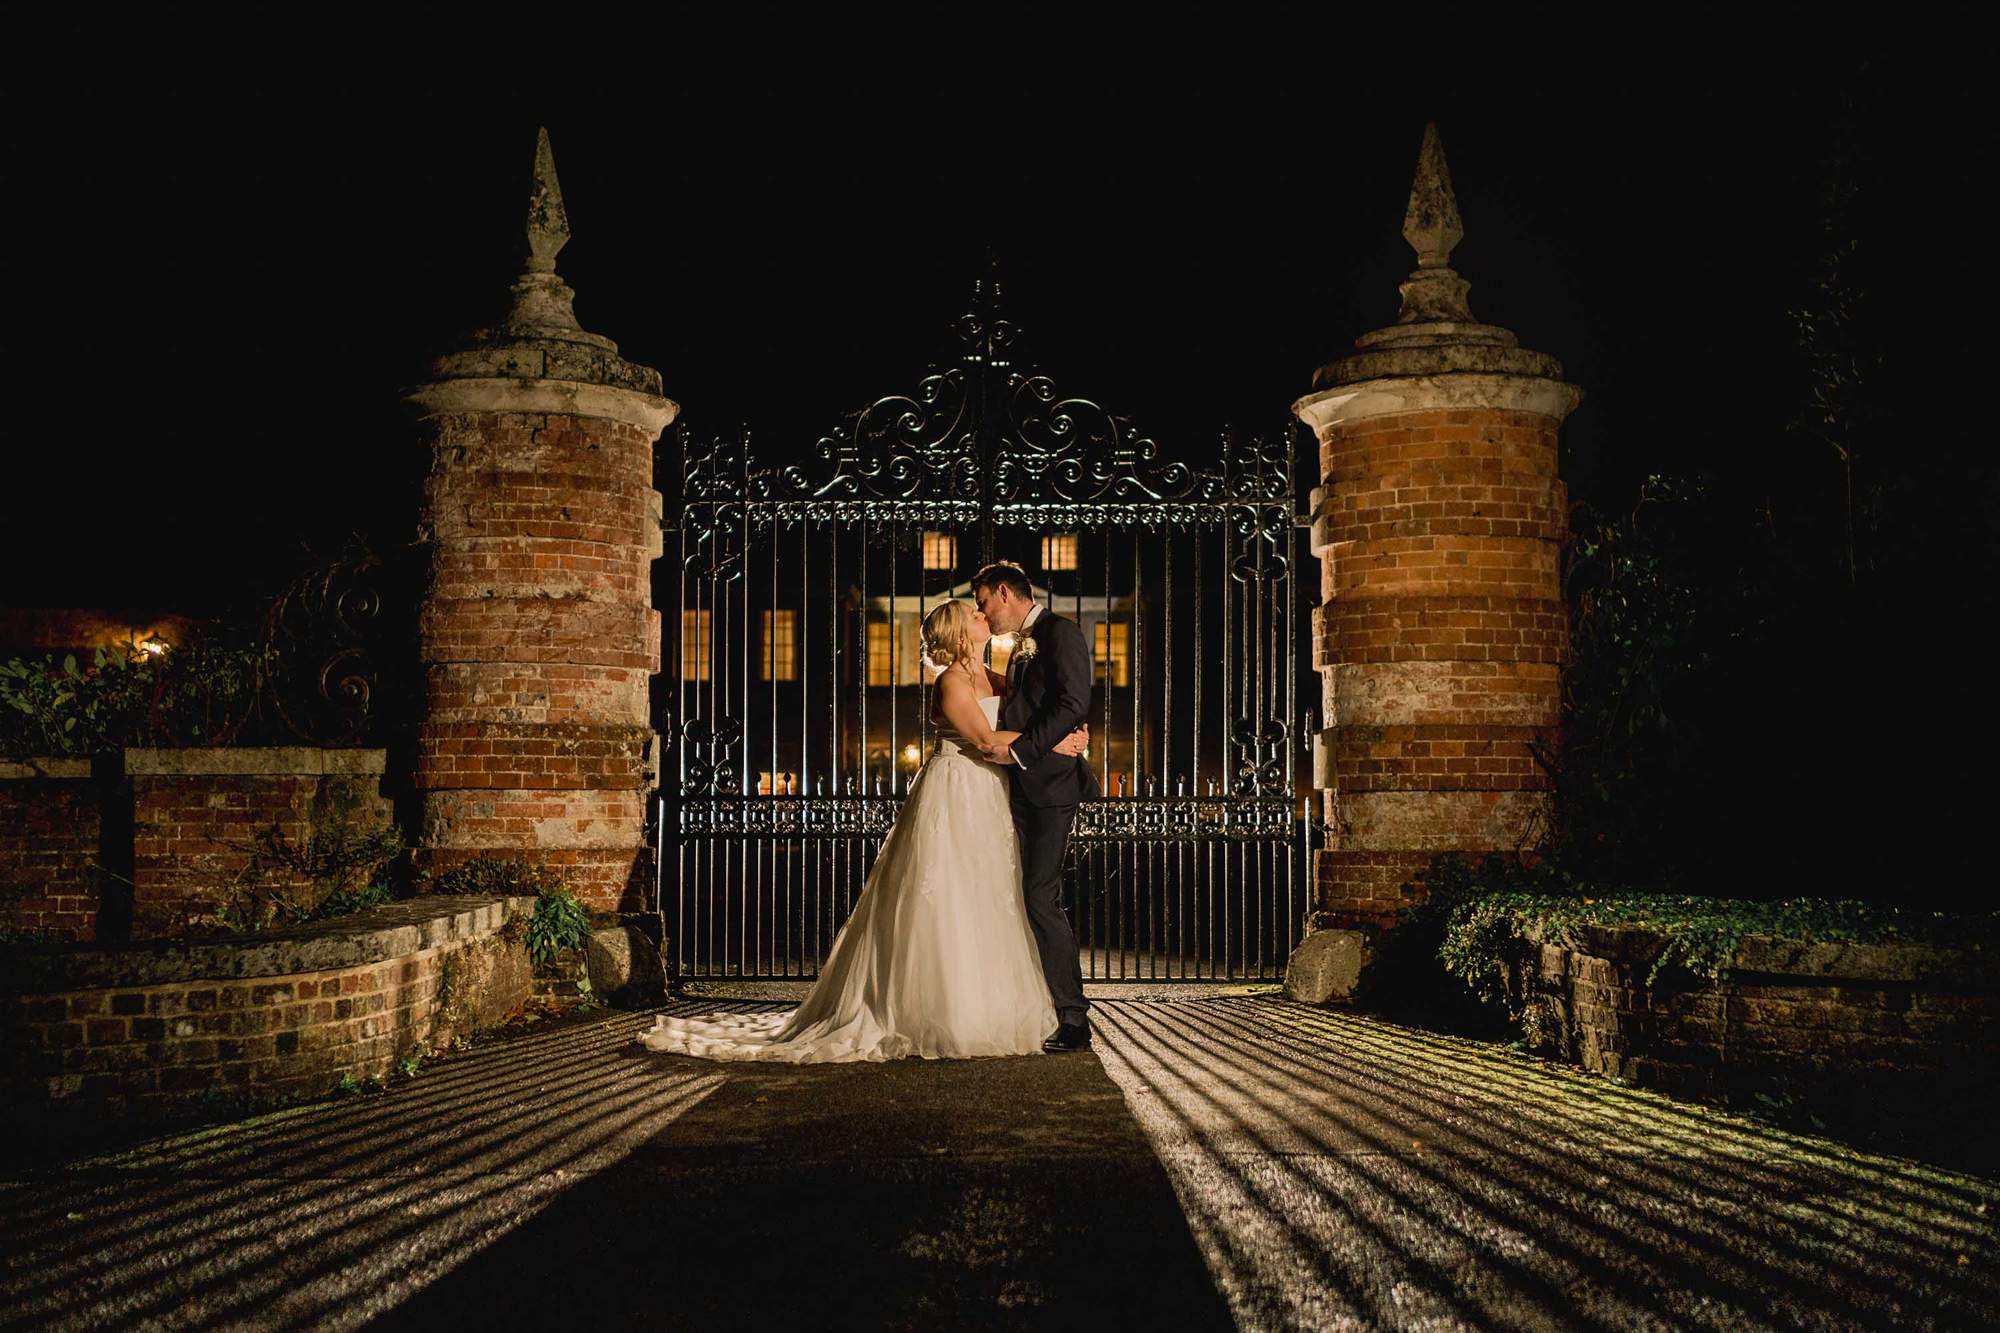 Bride and groom kiss in the evening in front of the gates at the entrance of Lainston House.